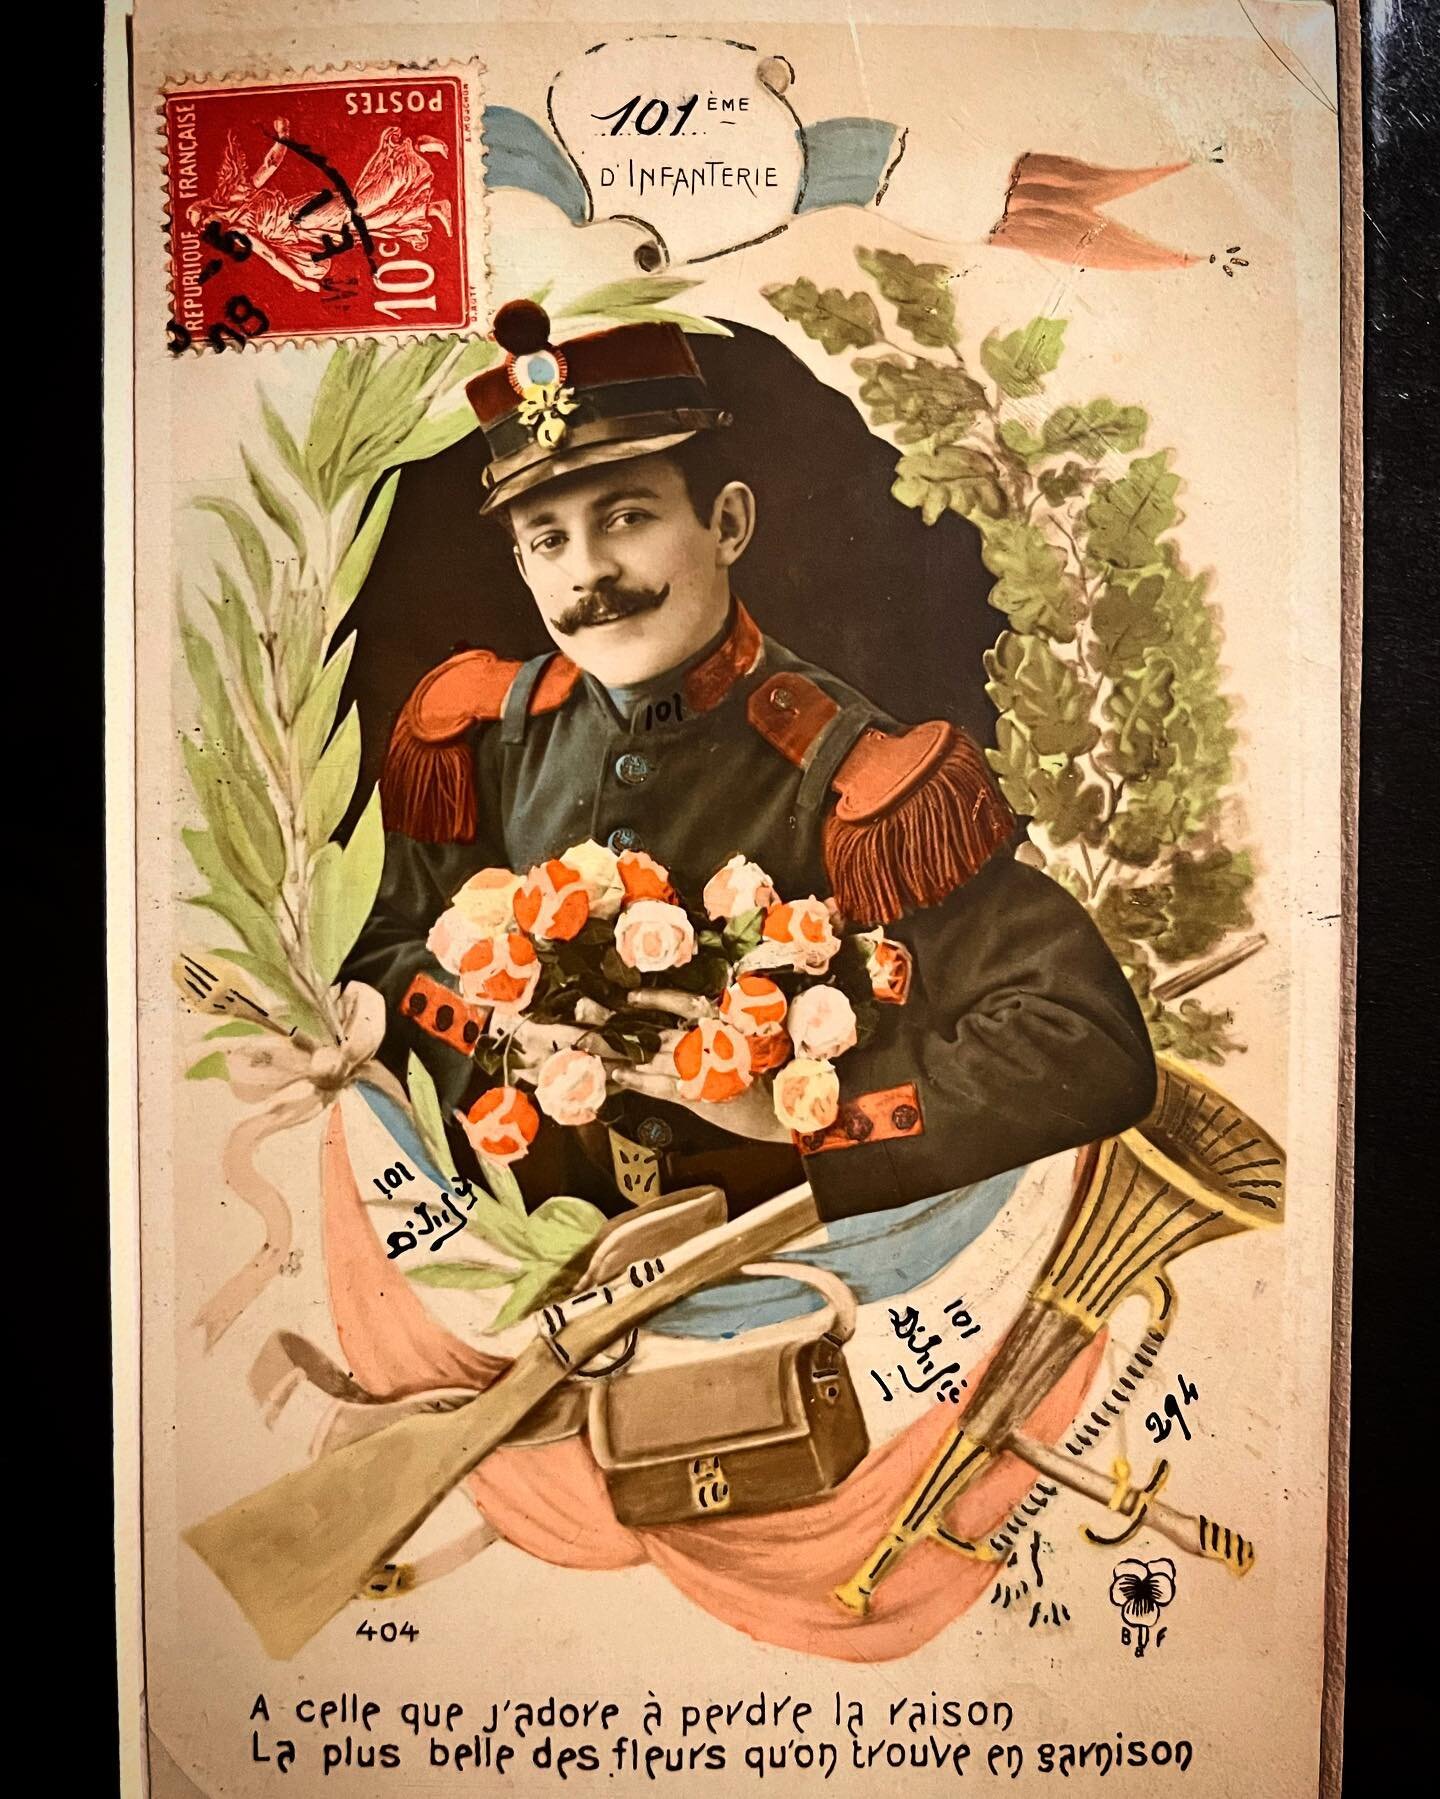 &ldquo;&hellip; You are more beautiful than the flowers one finds in Garrison.&rdquo; 

Adam (@the_real_henzbo) surprised me with a beautiful and thoughtful 1908 postcard from a flirty French 101st Infantry regiment Soldier. This unit was related to 